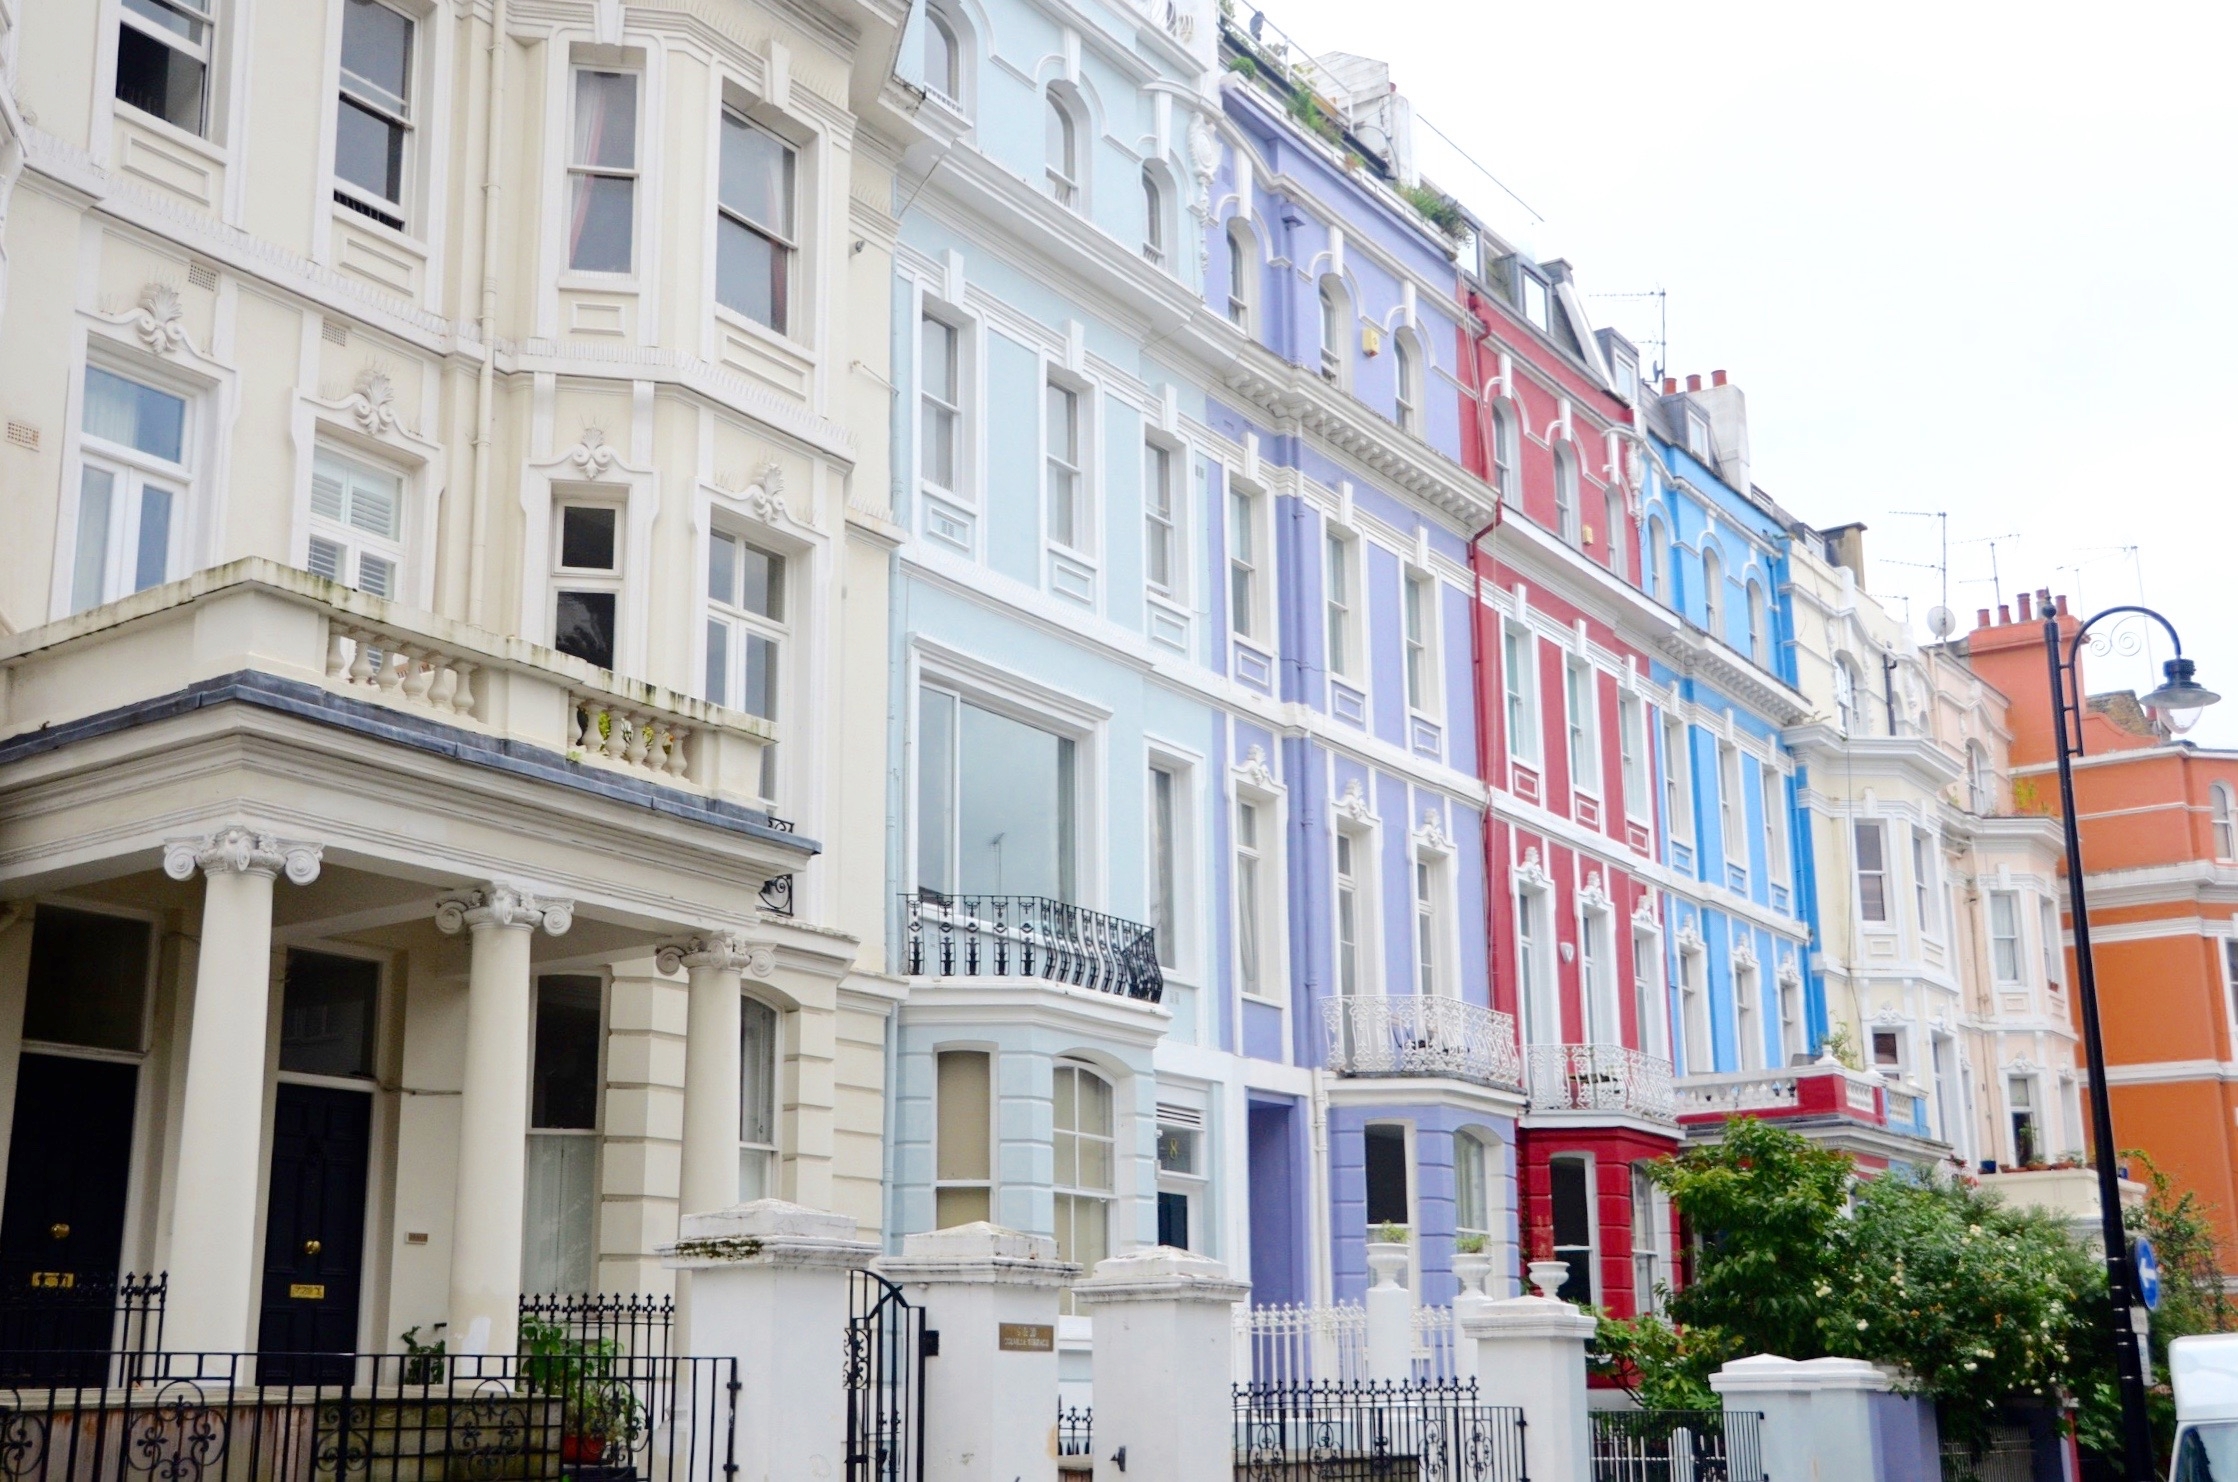 How to Decide Where to Stay in London (or Any City) — The City Sidewalks